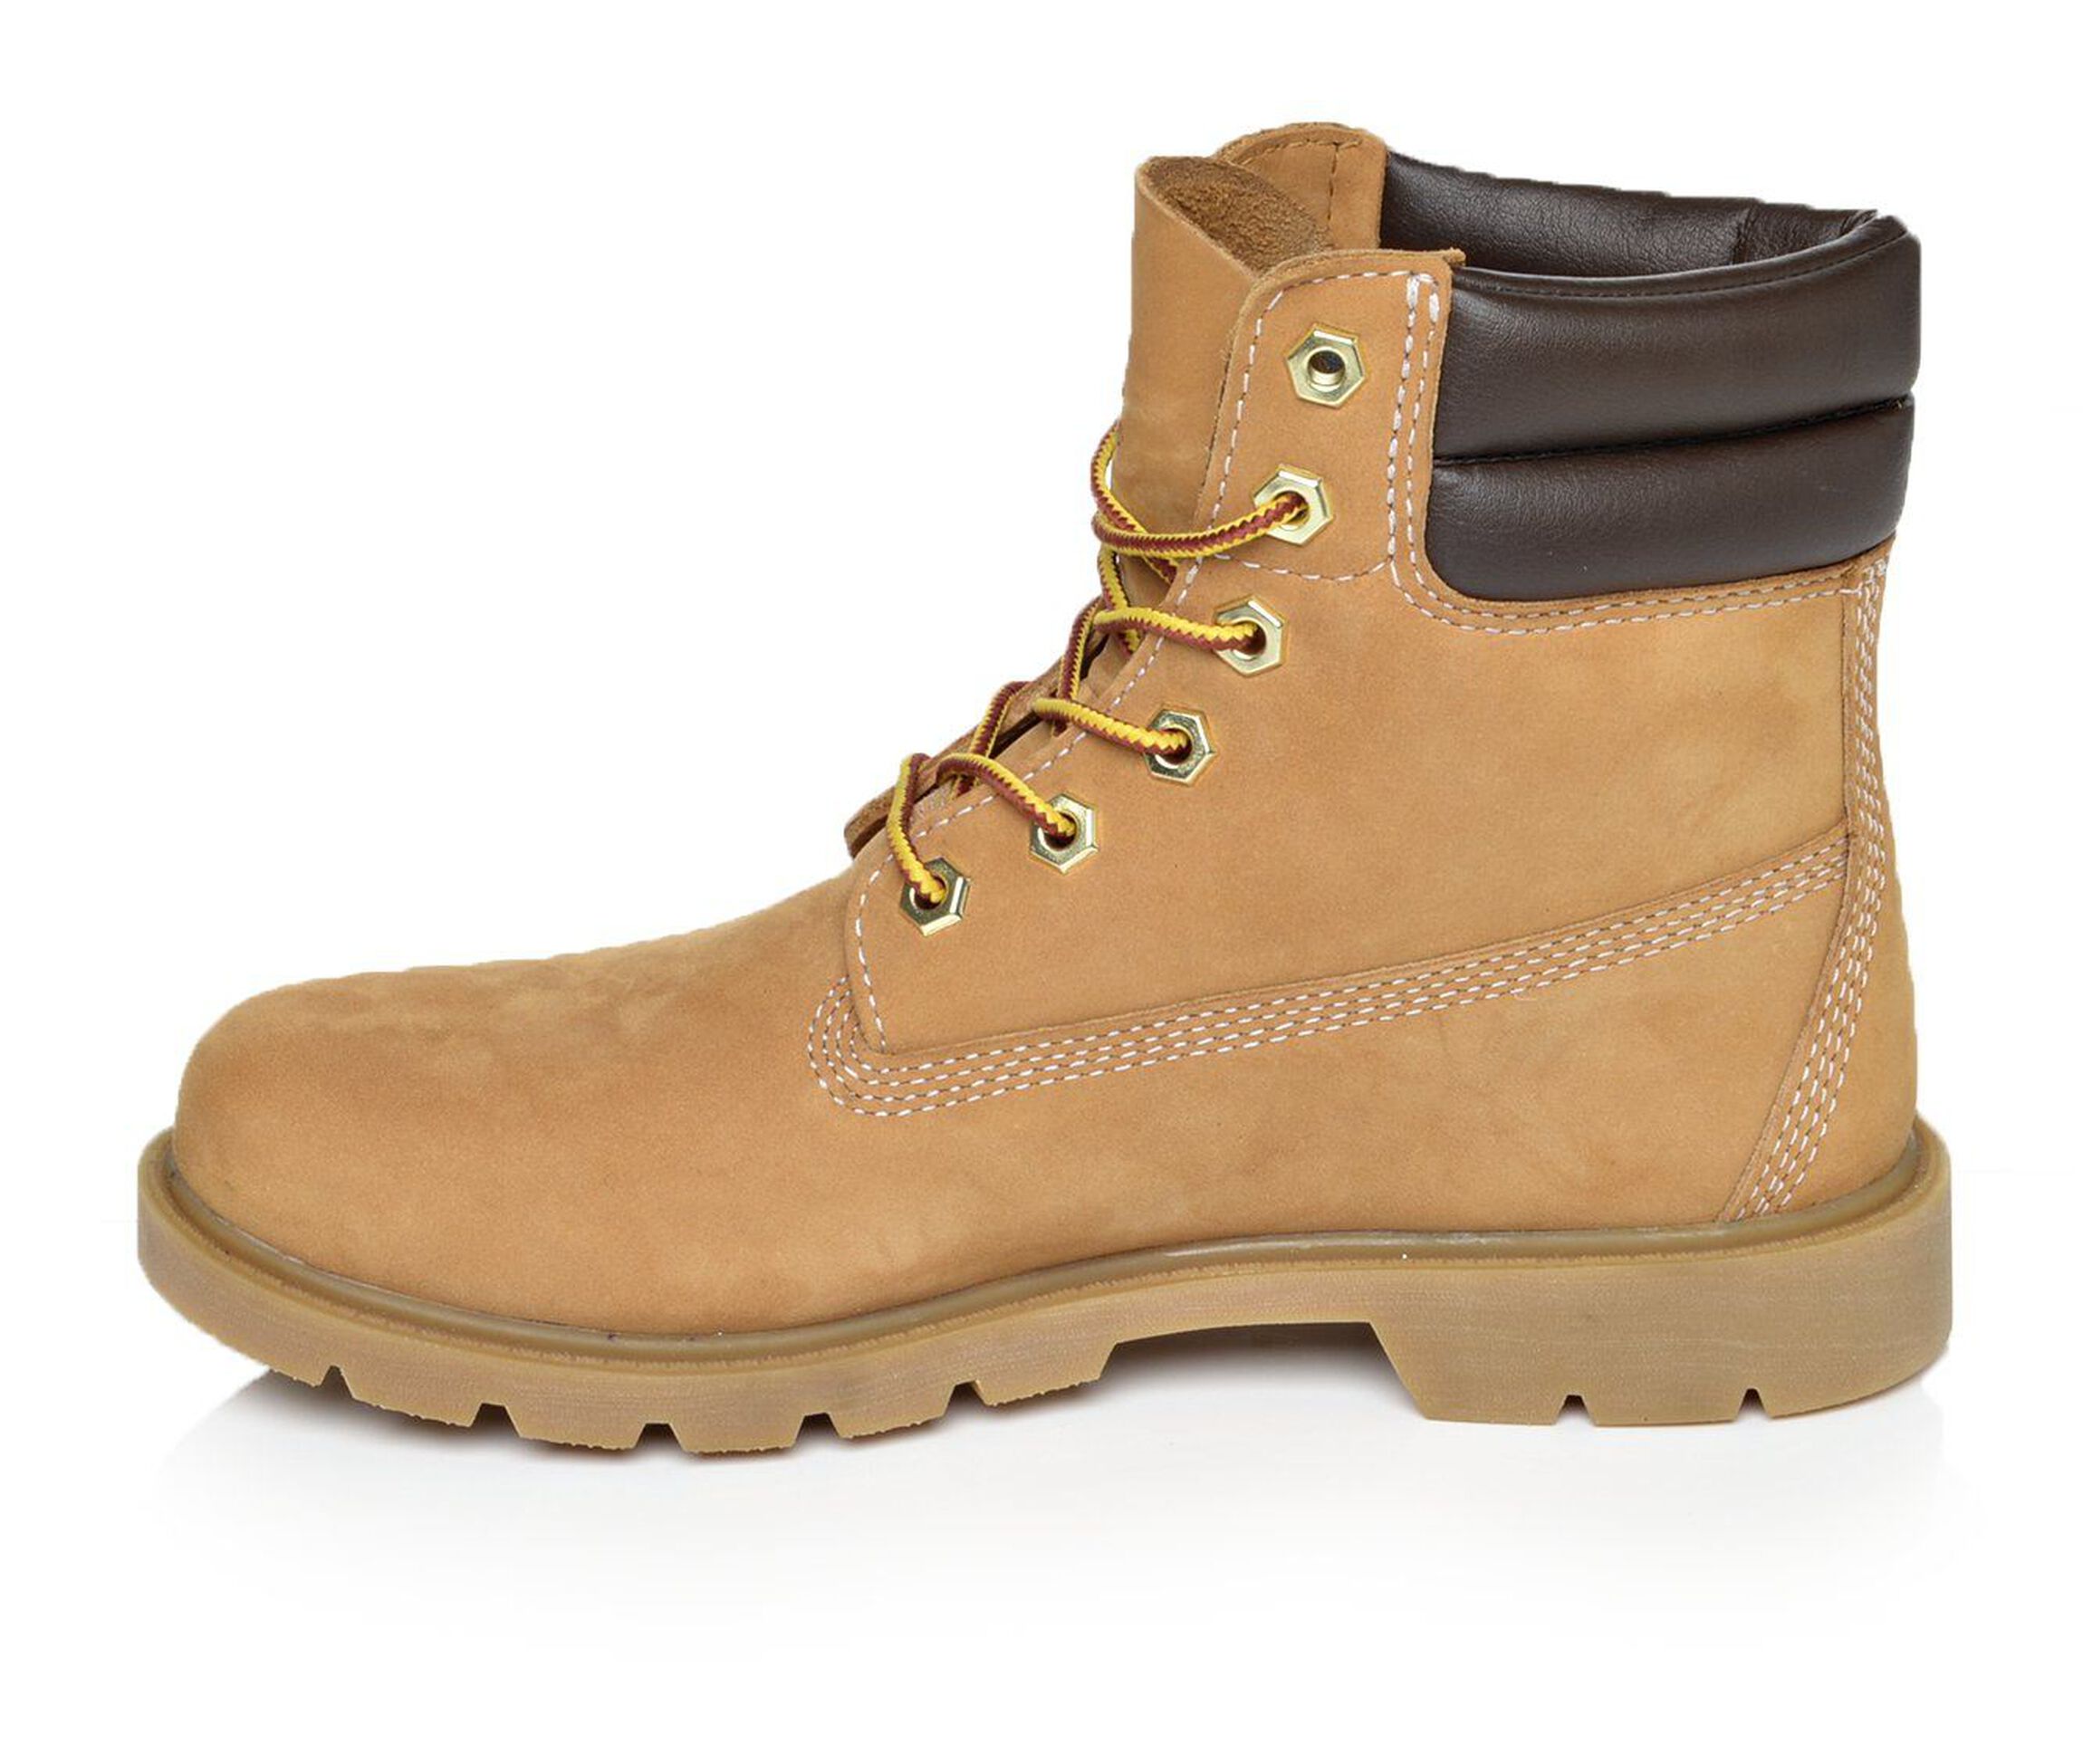 Women's Timberland Shoes & Boots | Shoe Carnival